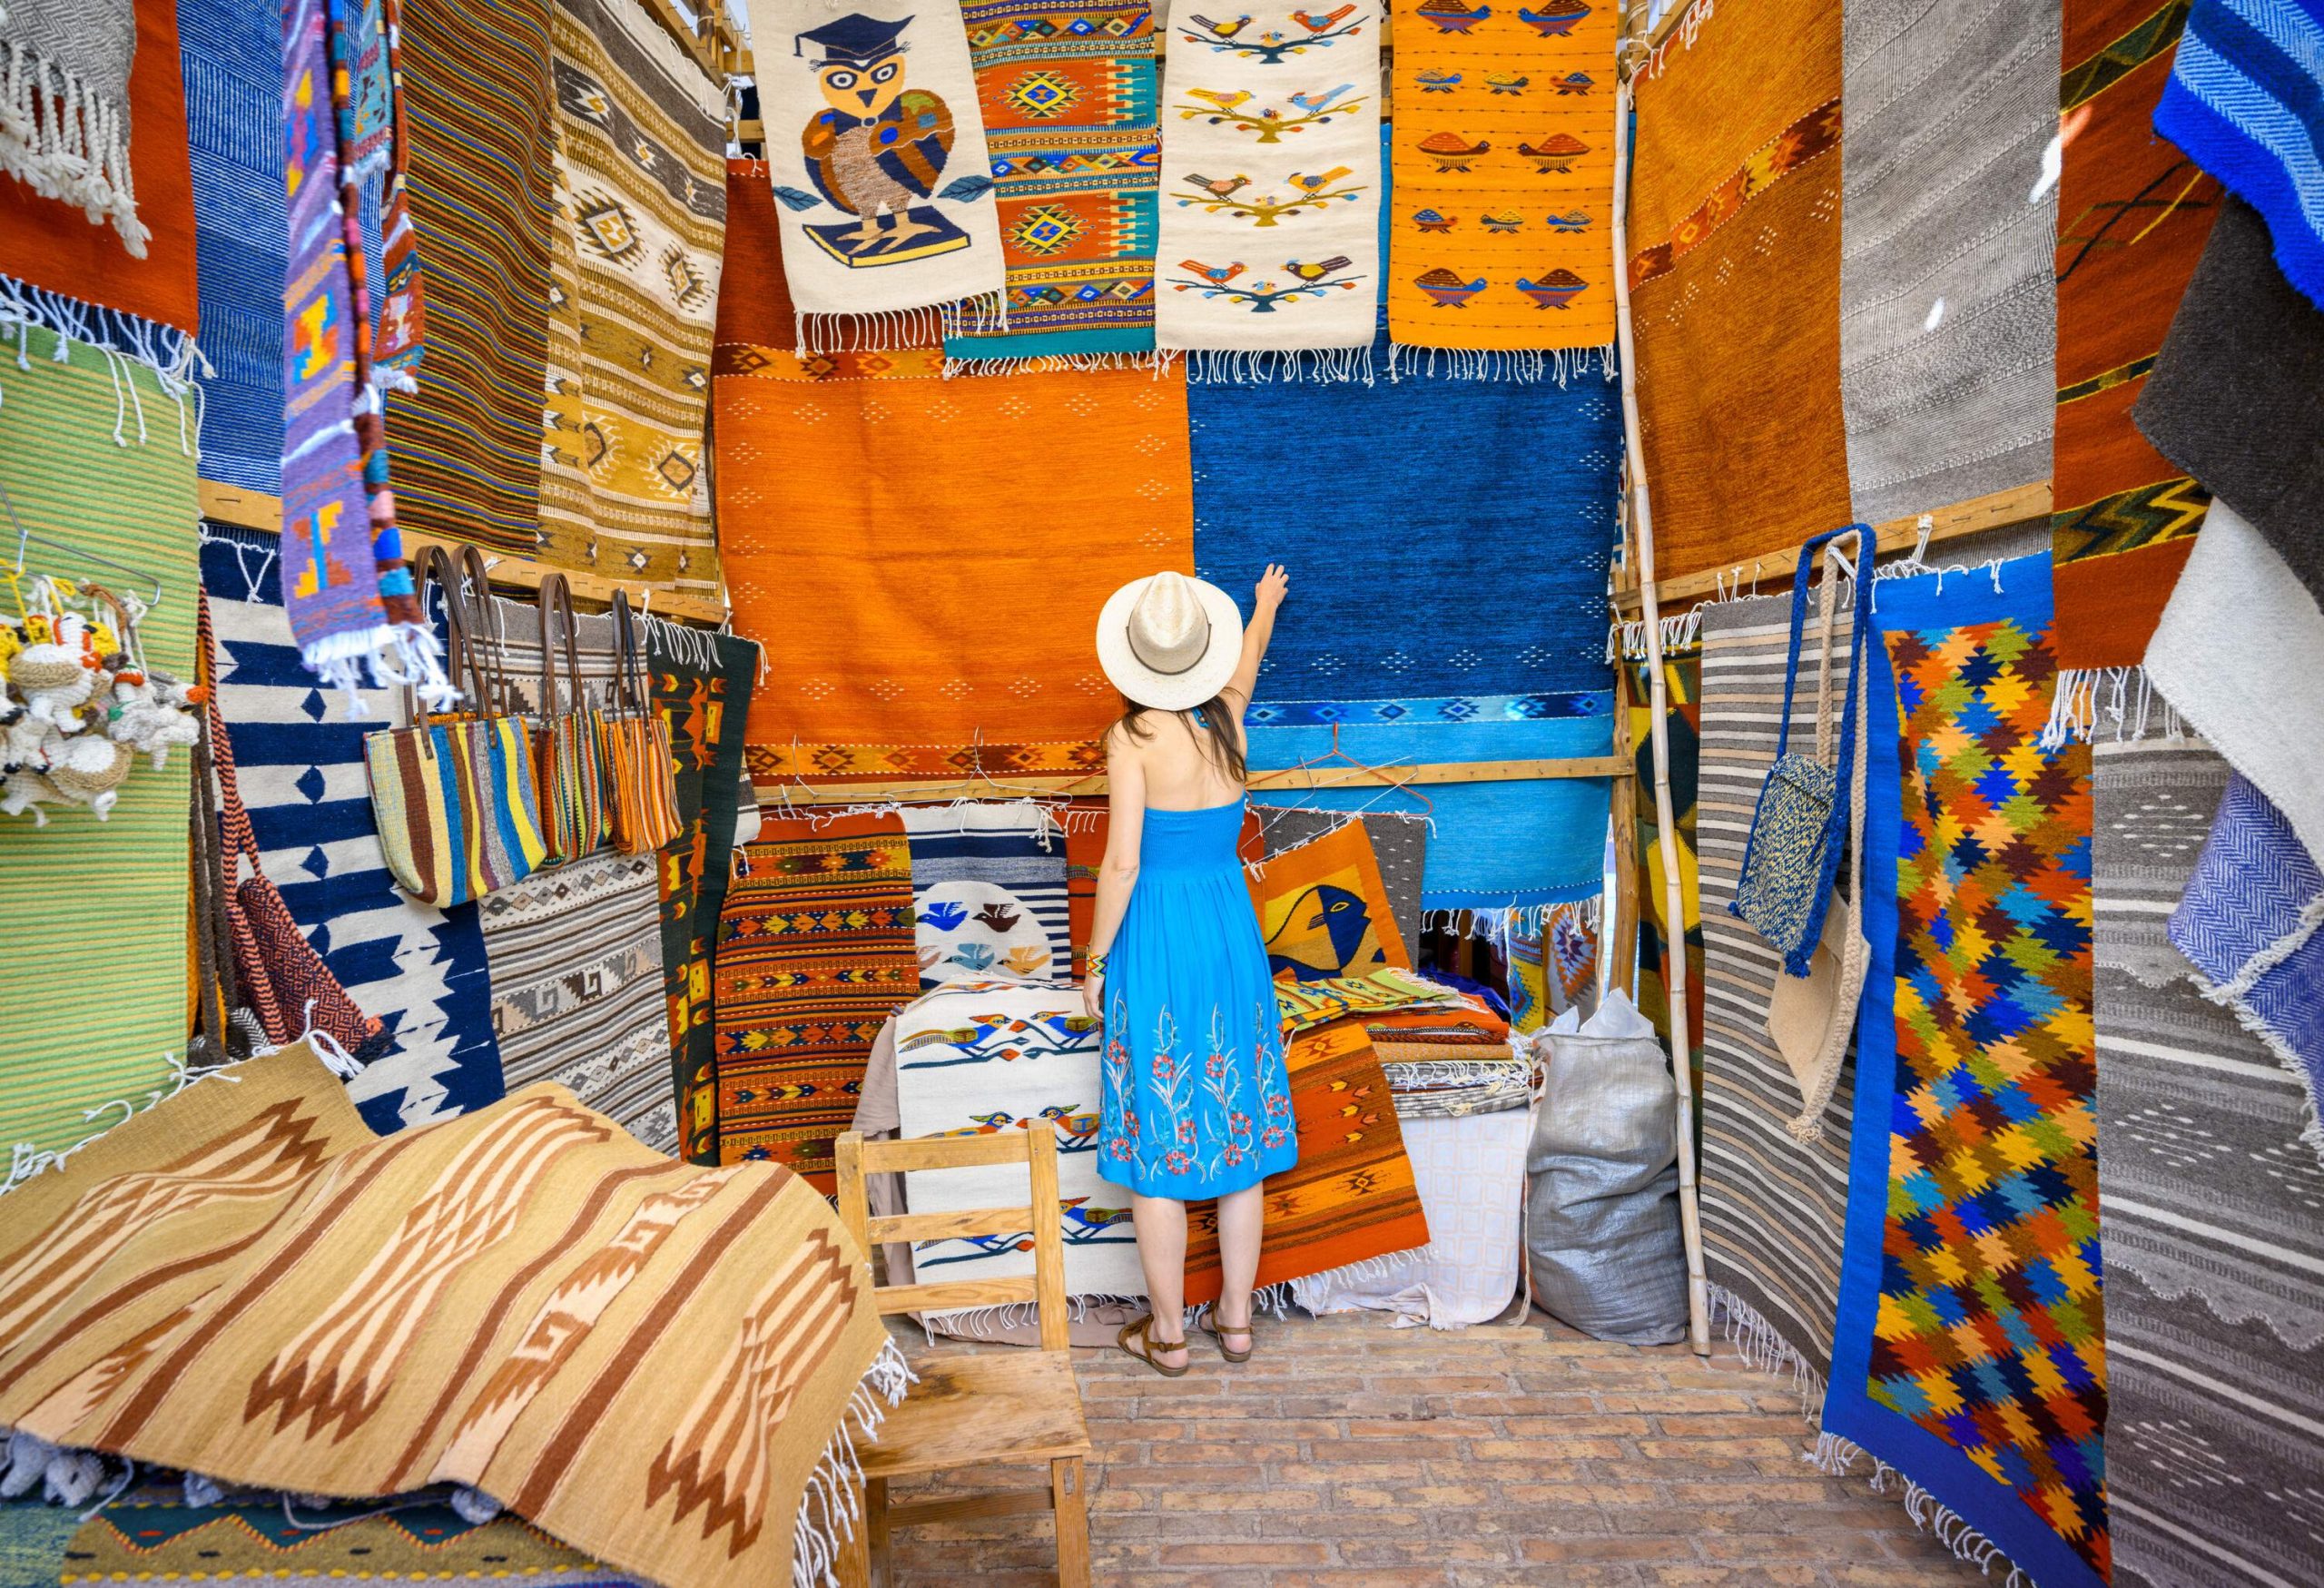 dest_mexico_oaxaca_theme_people_woman_shopping_local-rugs_gettyimages-1209650668_universal_within-usage-period_99221